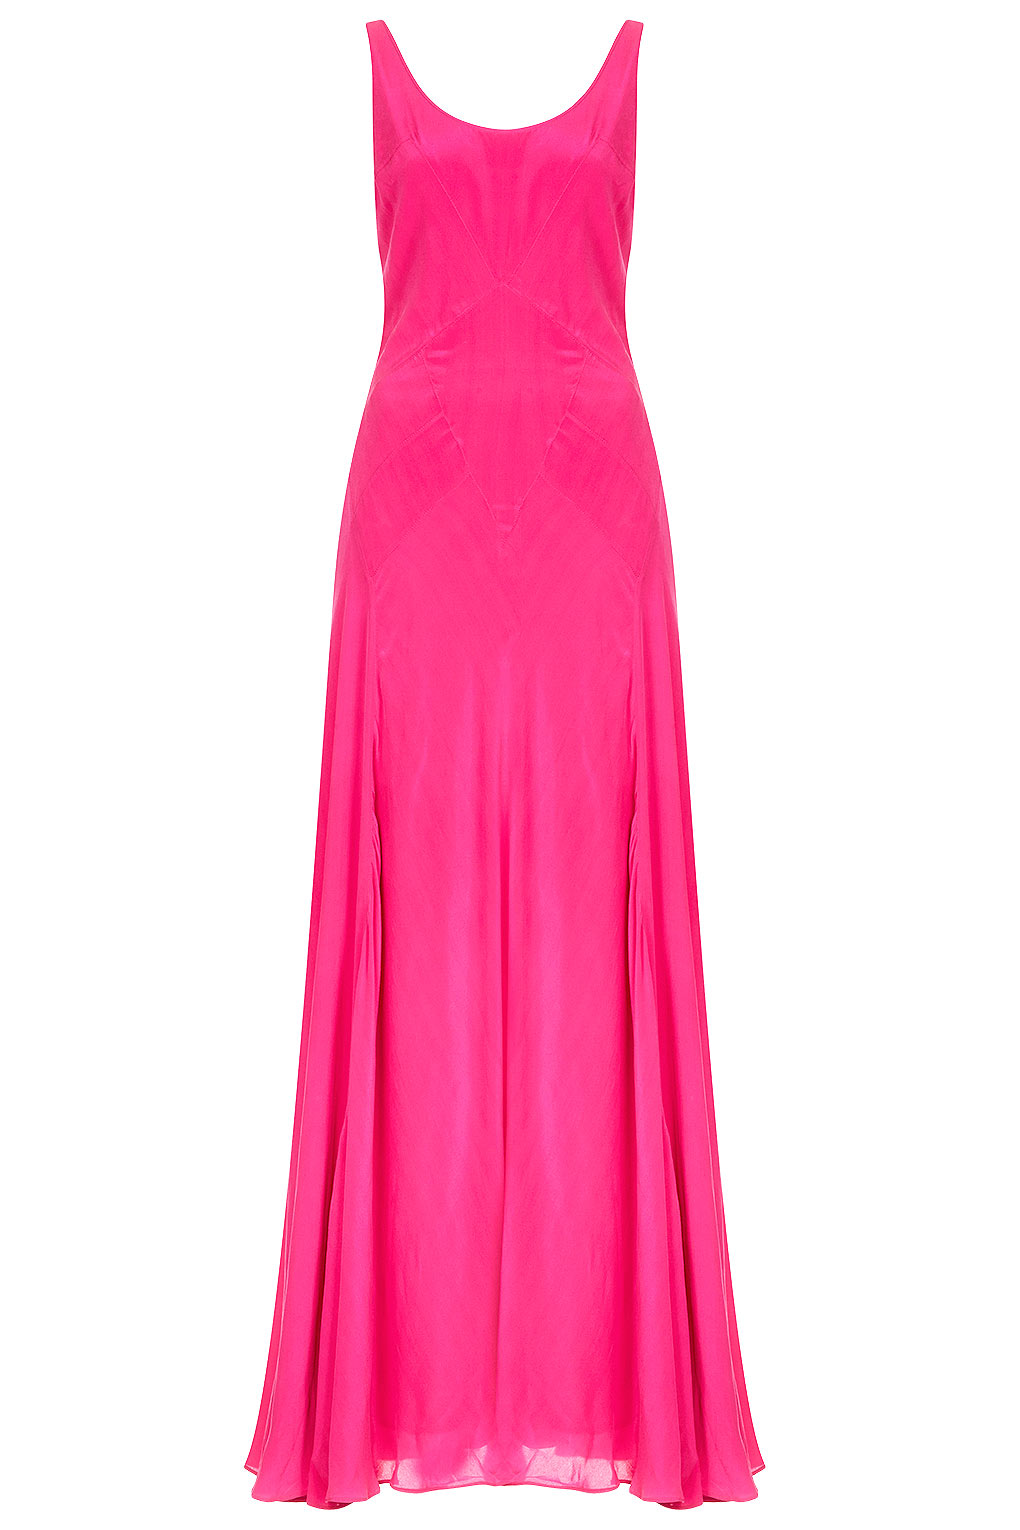 Topshop Limited Edition Silk Maxi Dress in Pink | Lyst